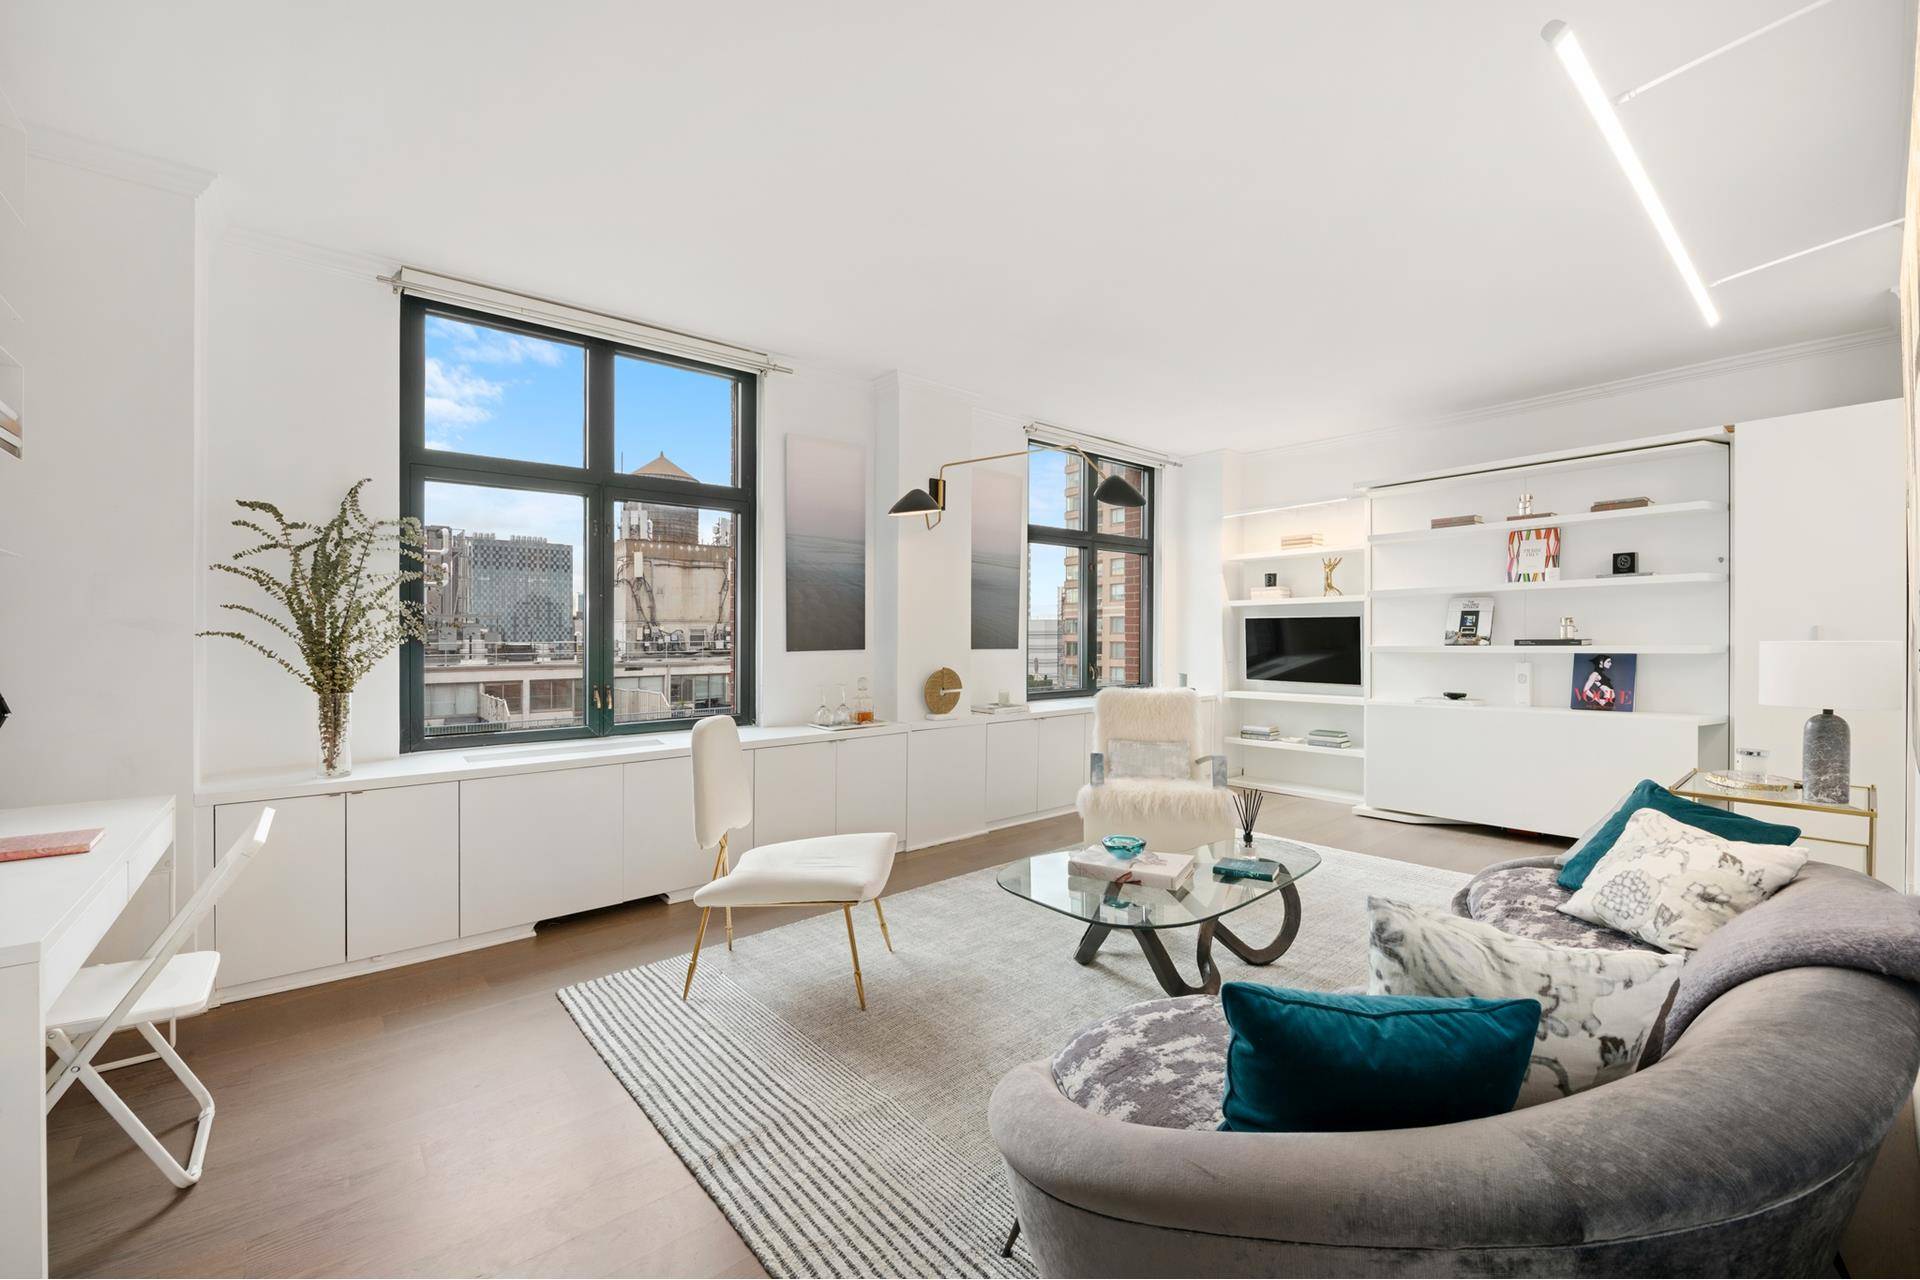 Experience the epitome of refined living in this exquisitely crafted Upper East Side condominium, nestled in the vibrant heart of Lenox Hill.